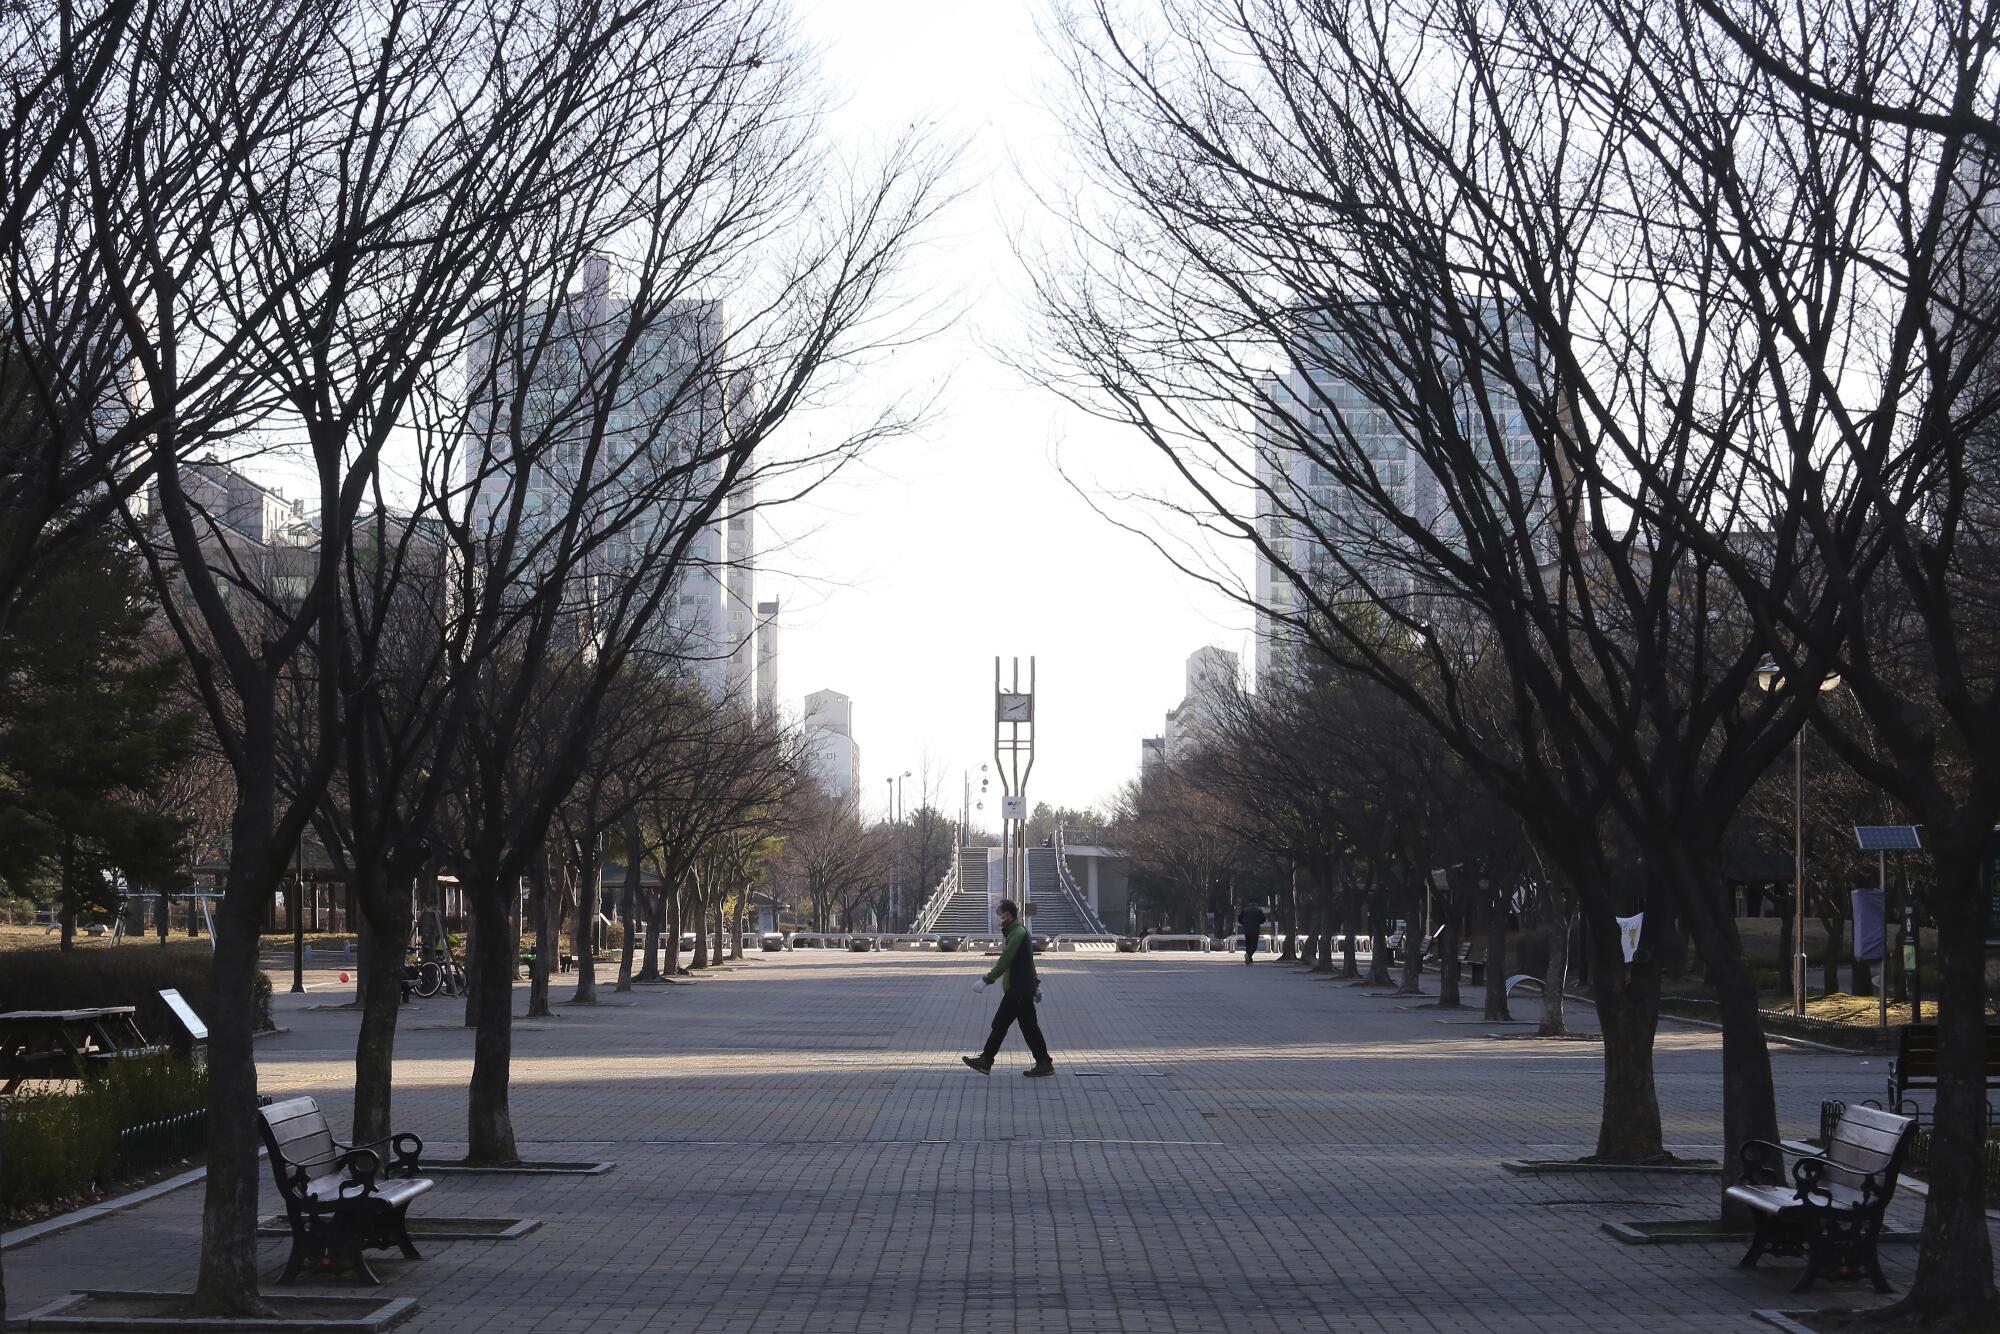 A man wearing a mask walks in a nearly empty park March 22 in Goyang, South Korea.